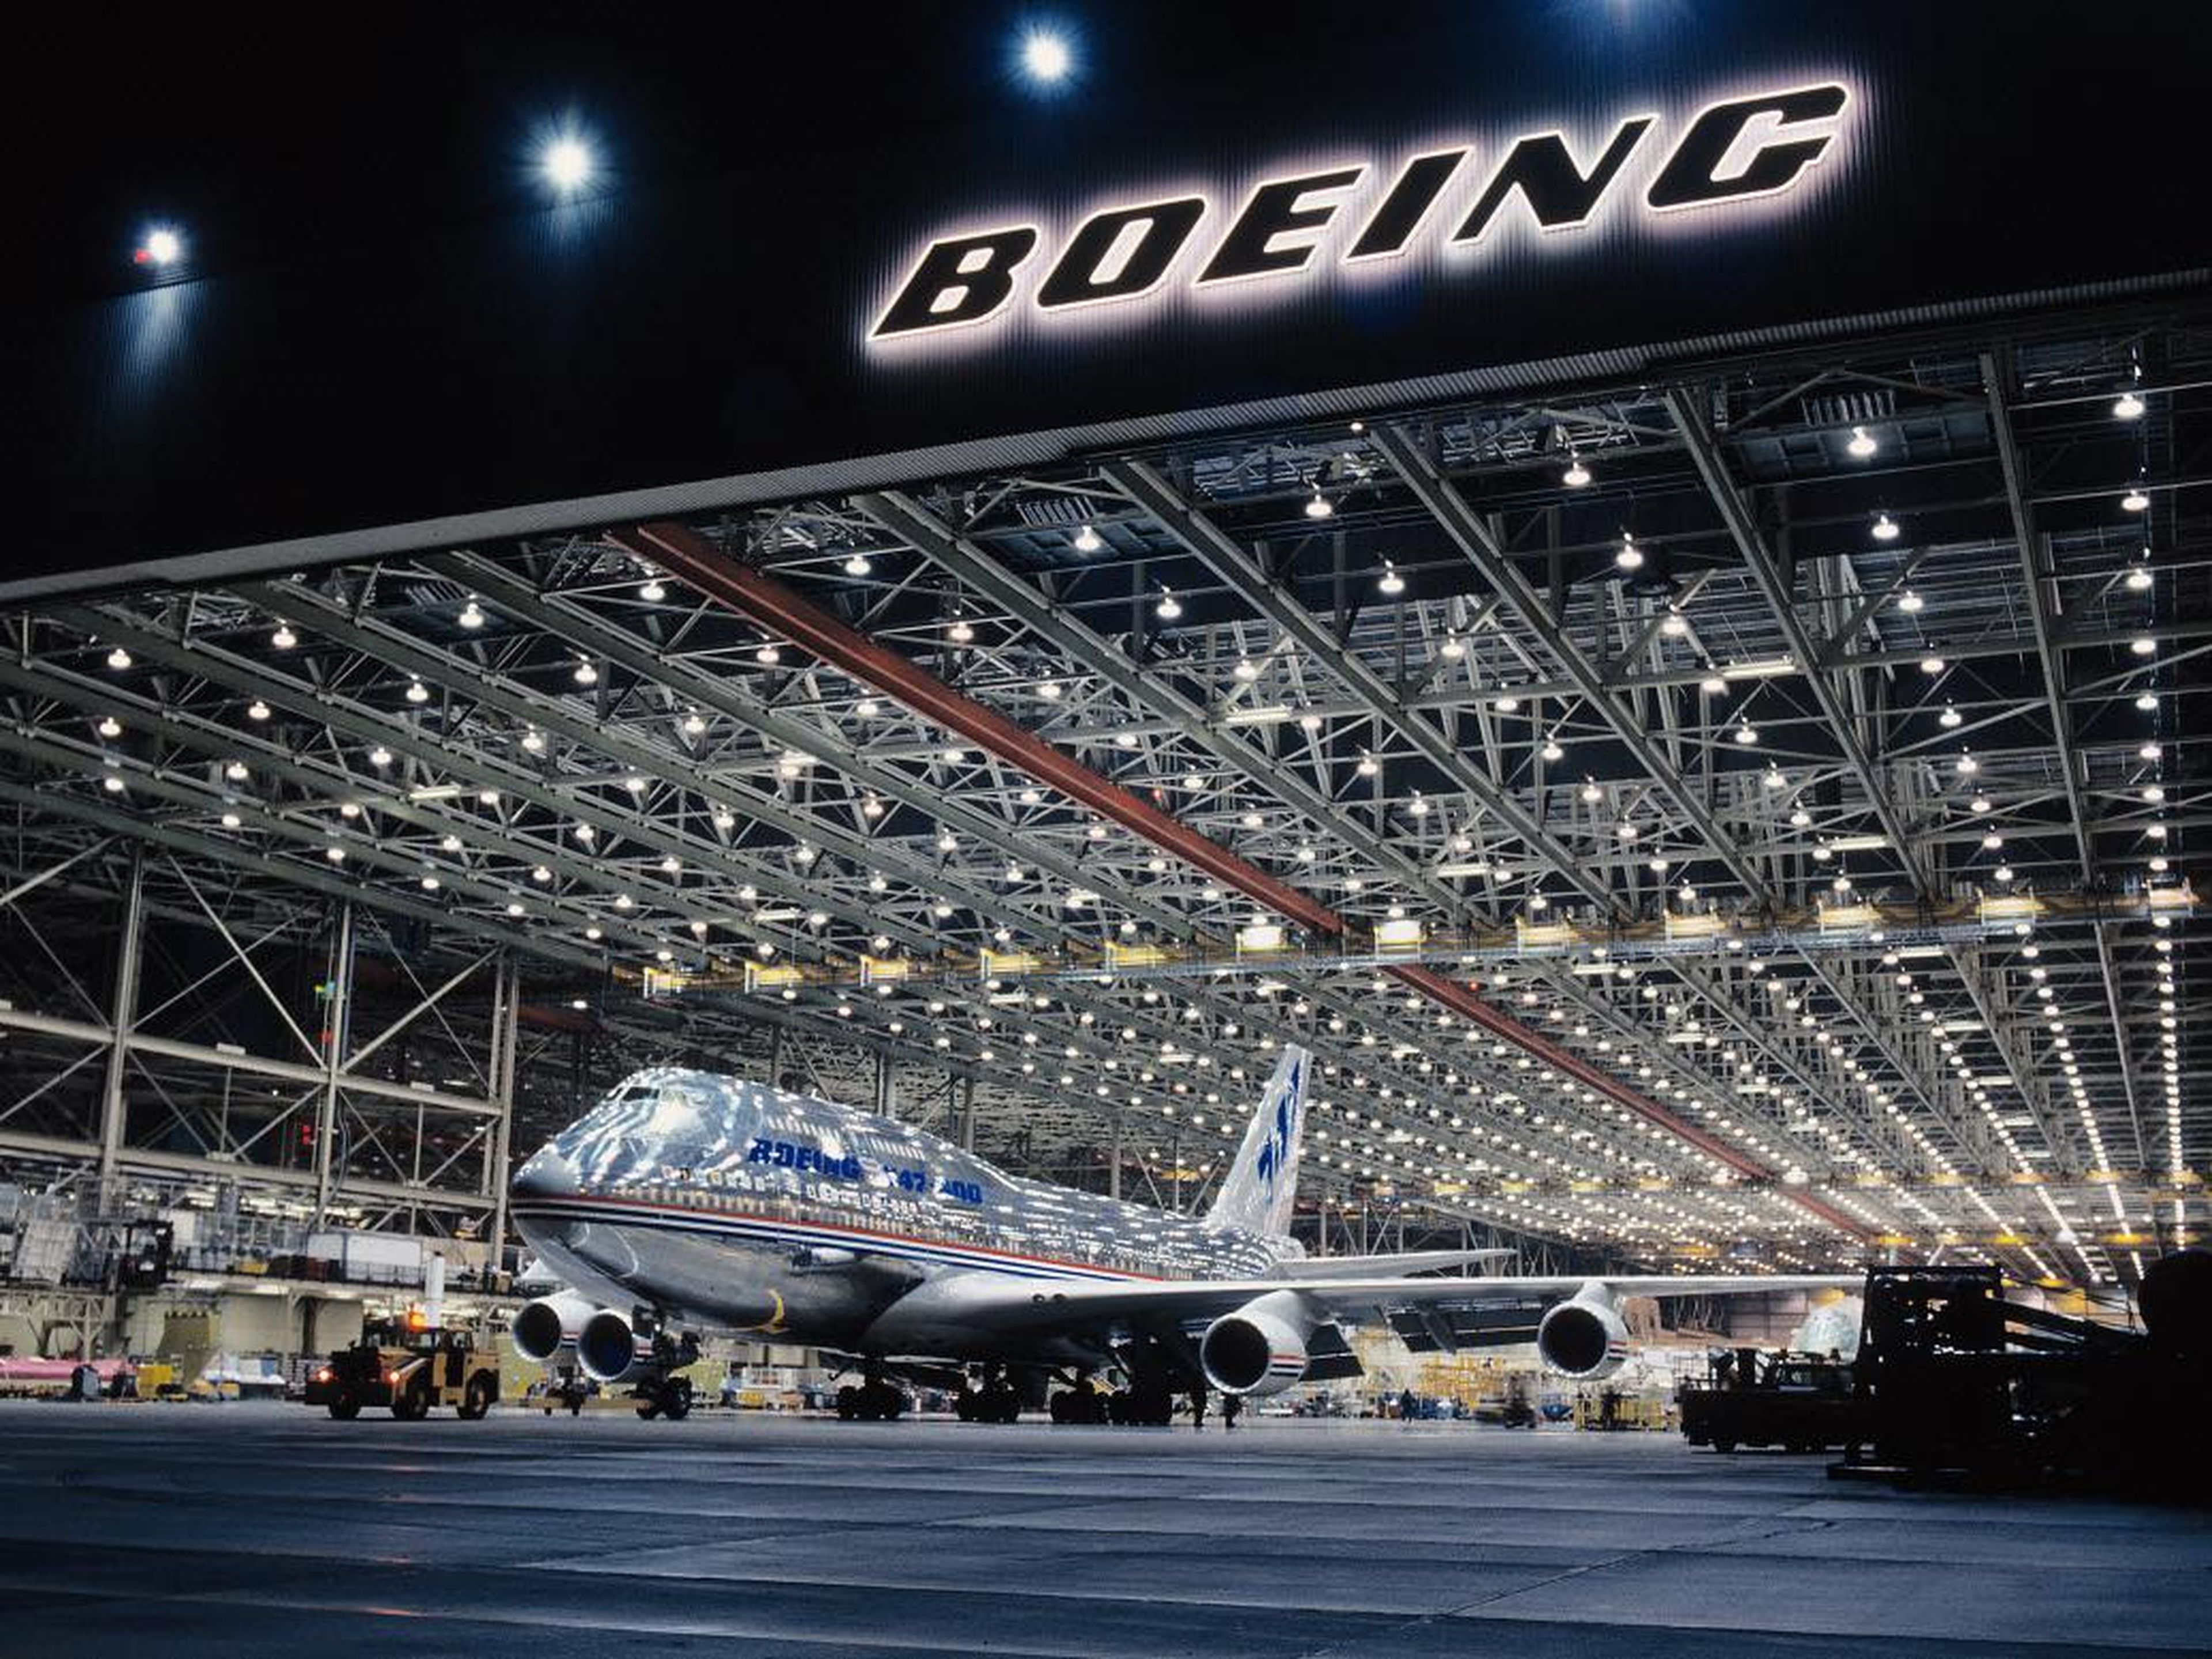 ... the Boeing 747-400. Airbus wanted to produce an aircraft even bigger than Boeing's latest jumbo jet — with lower operating costs.